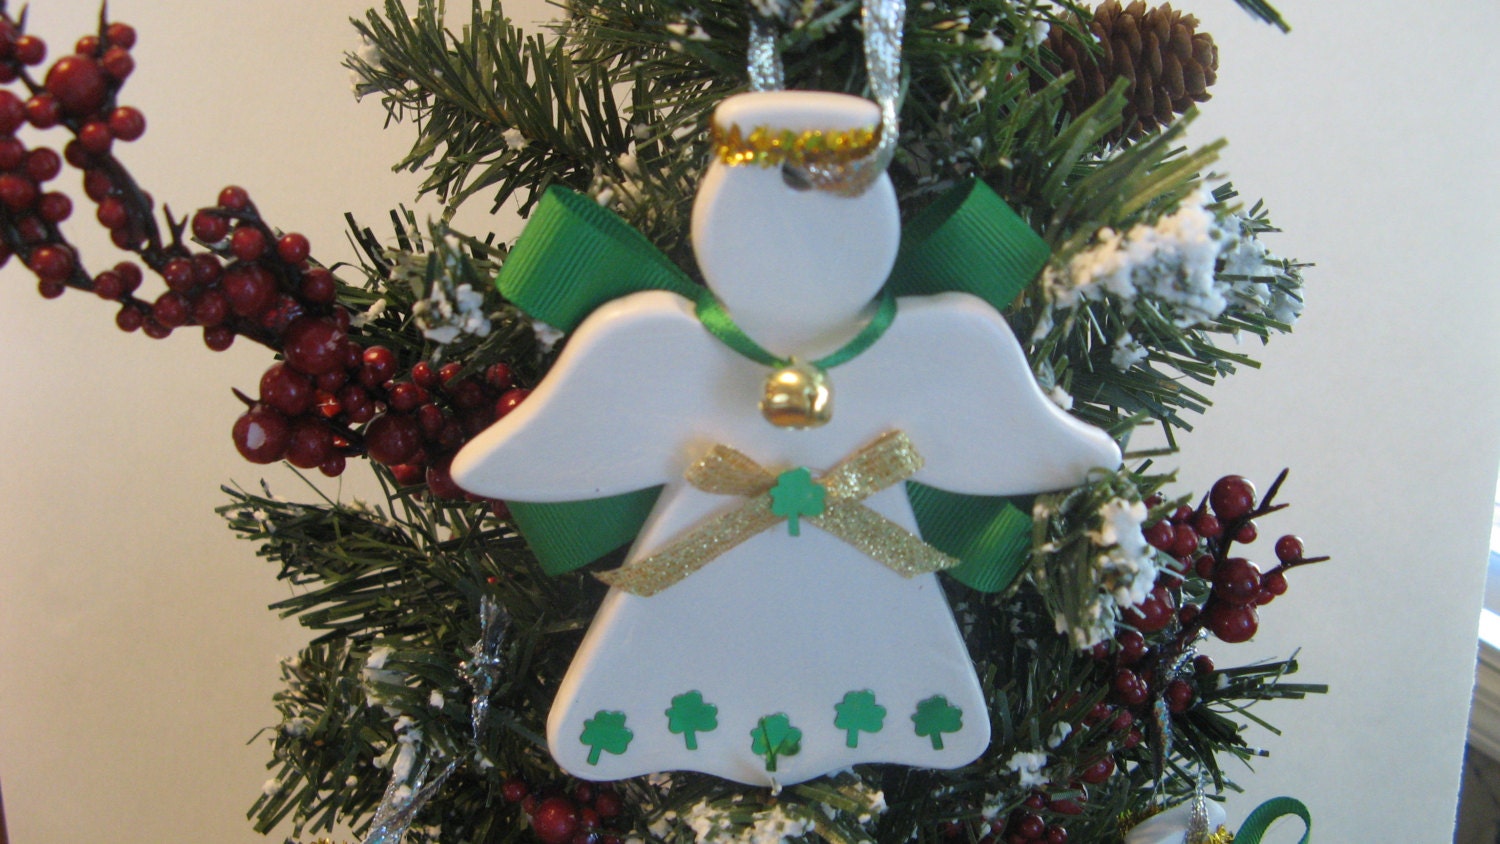 Irish angel ceramic hand painted and embellished ornament for tree, wreath or package trim. PERSONALIZED FREE!